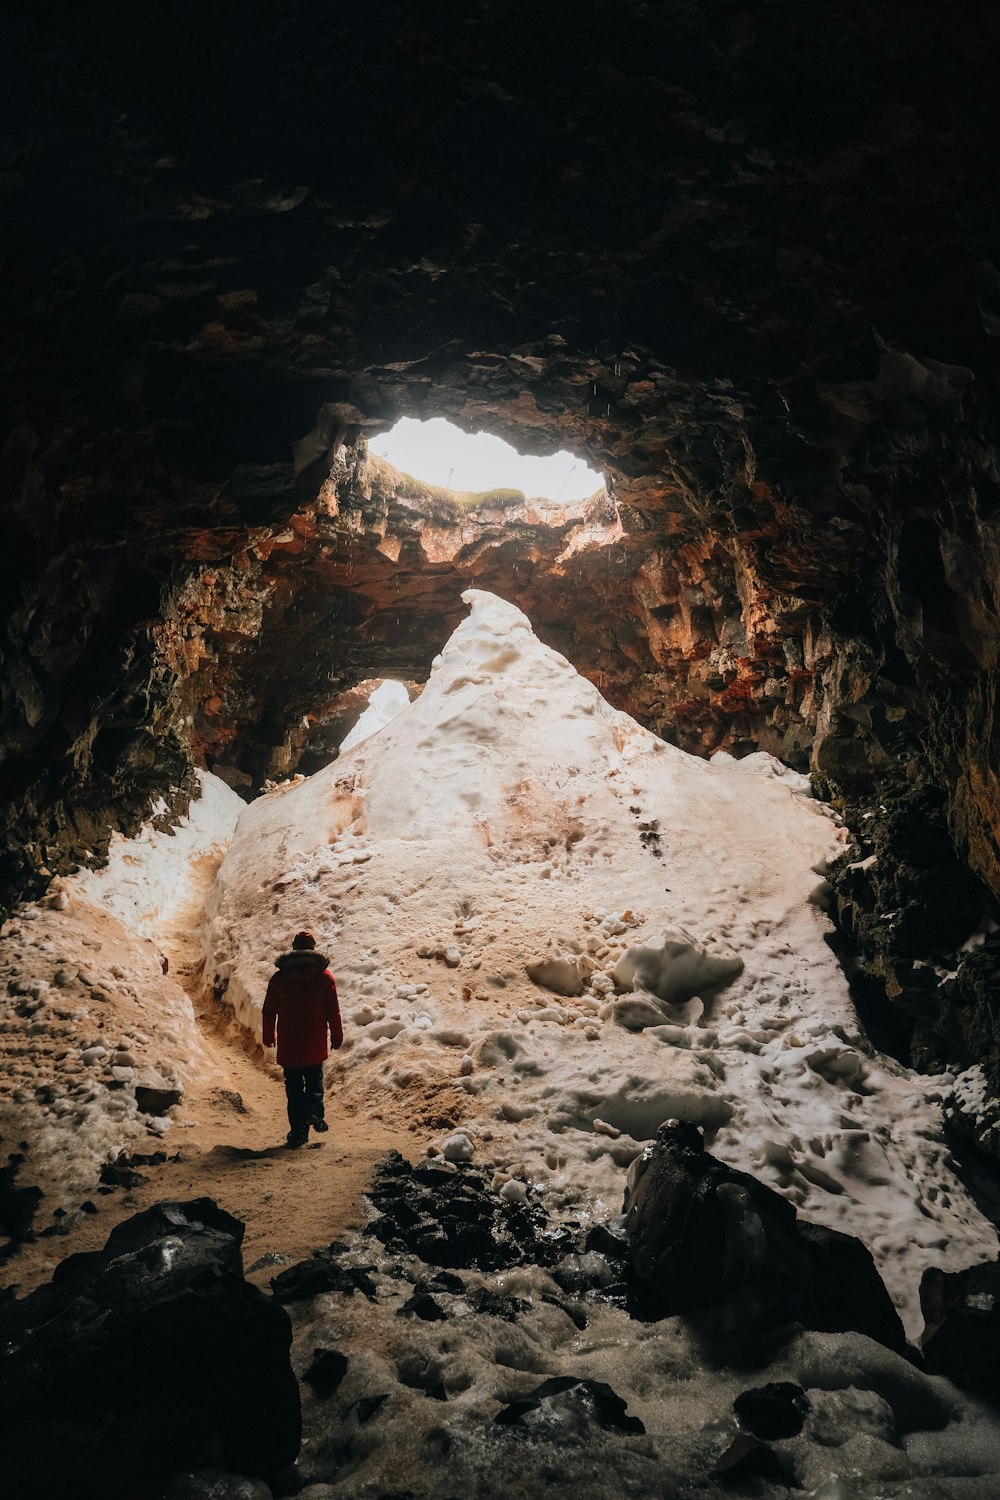 a person standing in a cave with snow on the ground